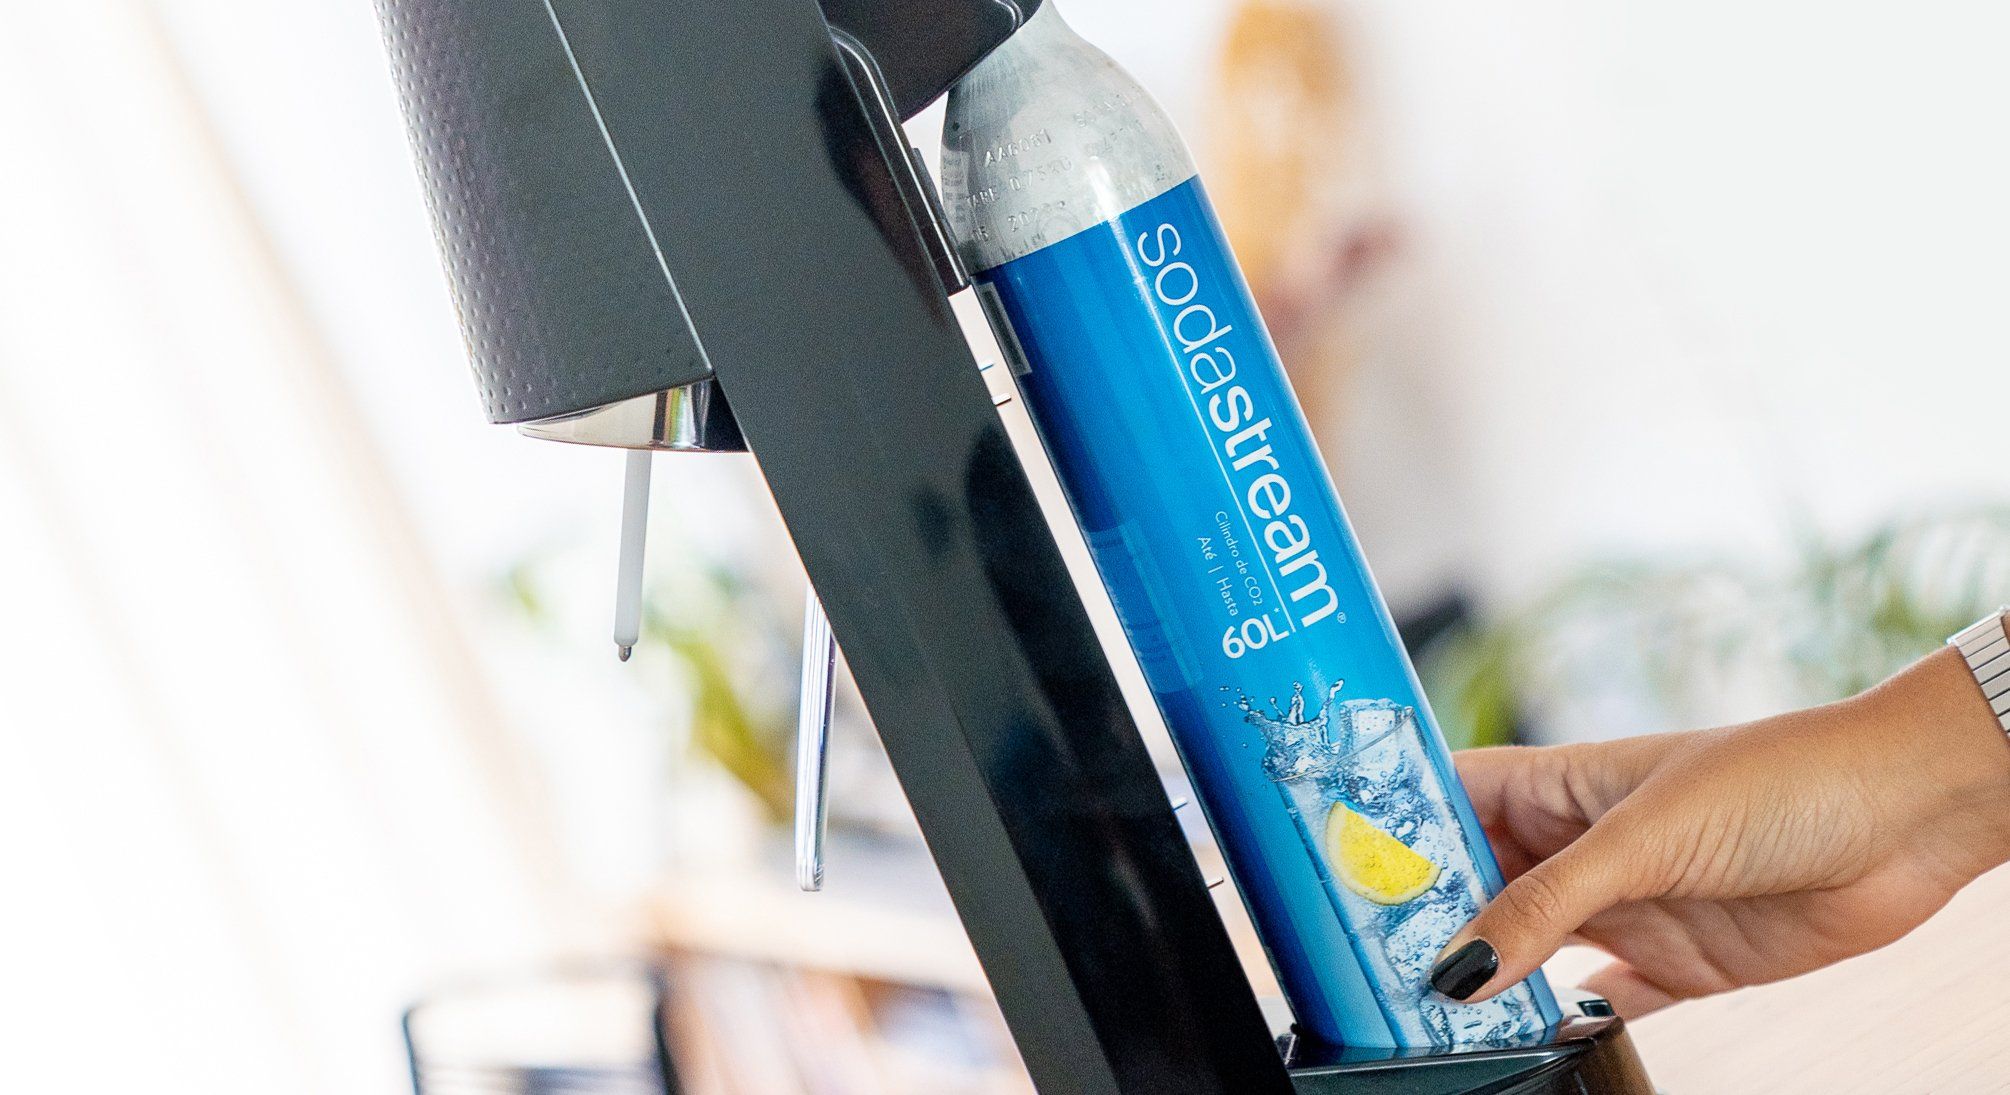 Get a 50% discount on your next gas exchange bought from sodastream.co.uk